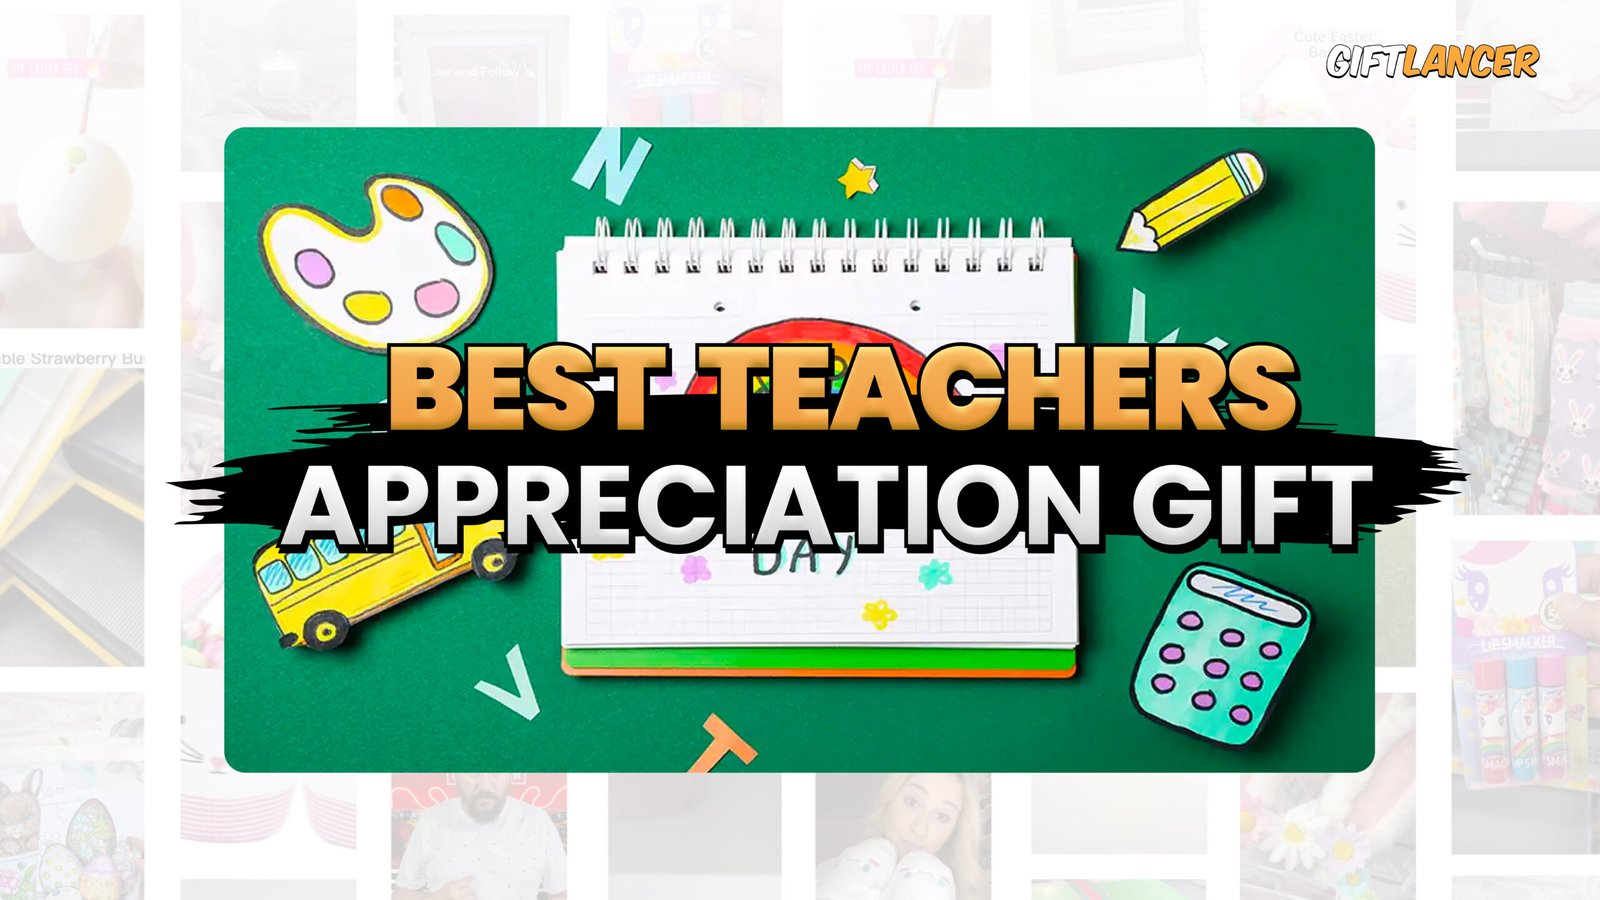 5 Appreciation Gift Ideas For Teachers As Suggested By Teachers On Instagram 